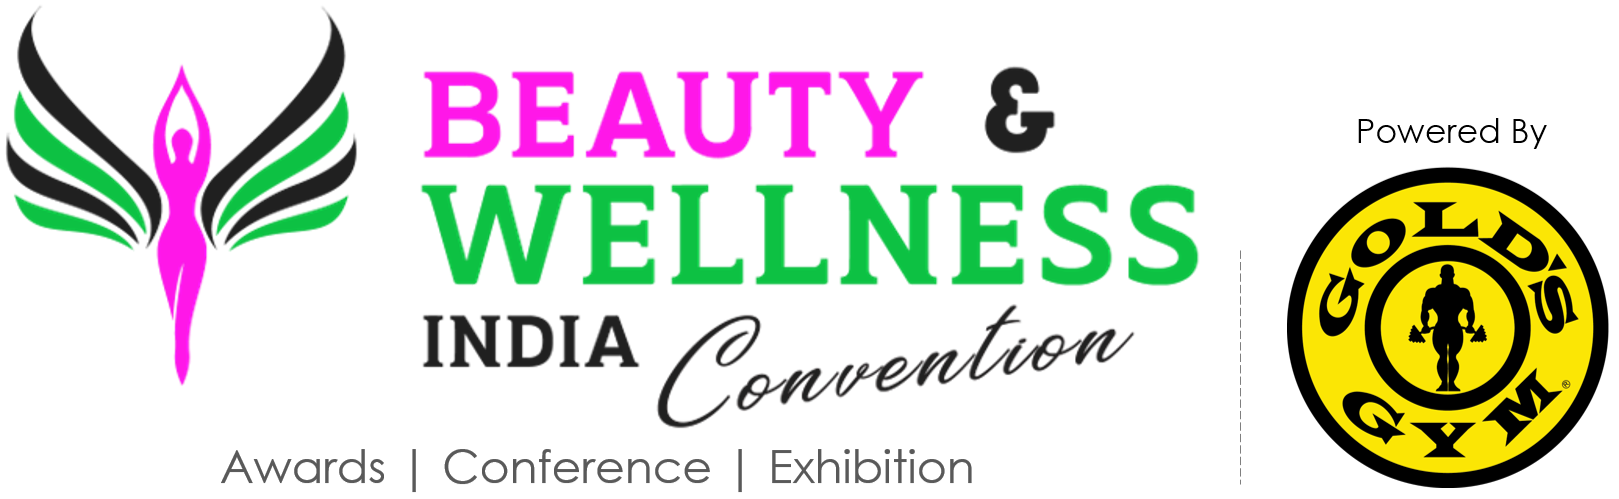 Beauty and Wellness India Convention